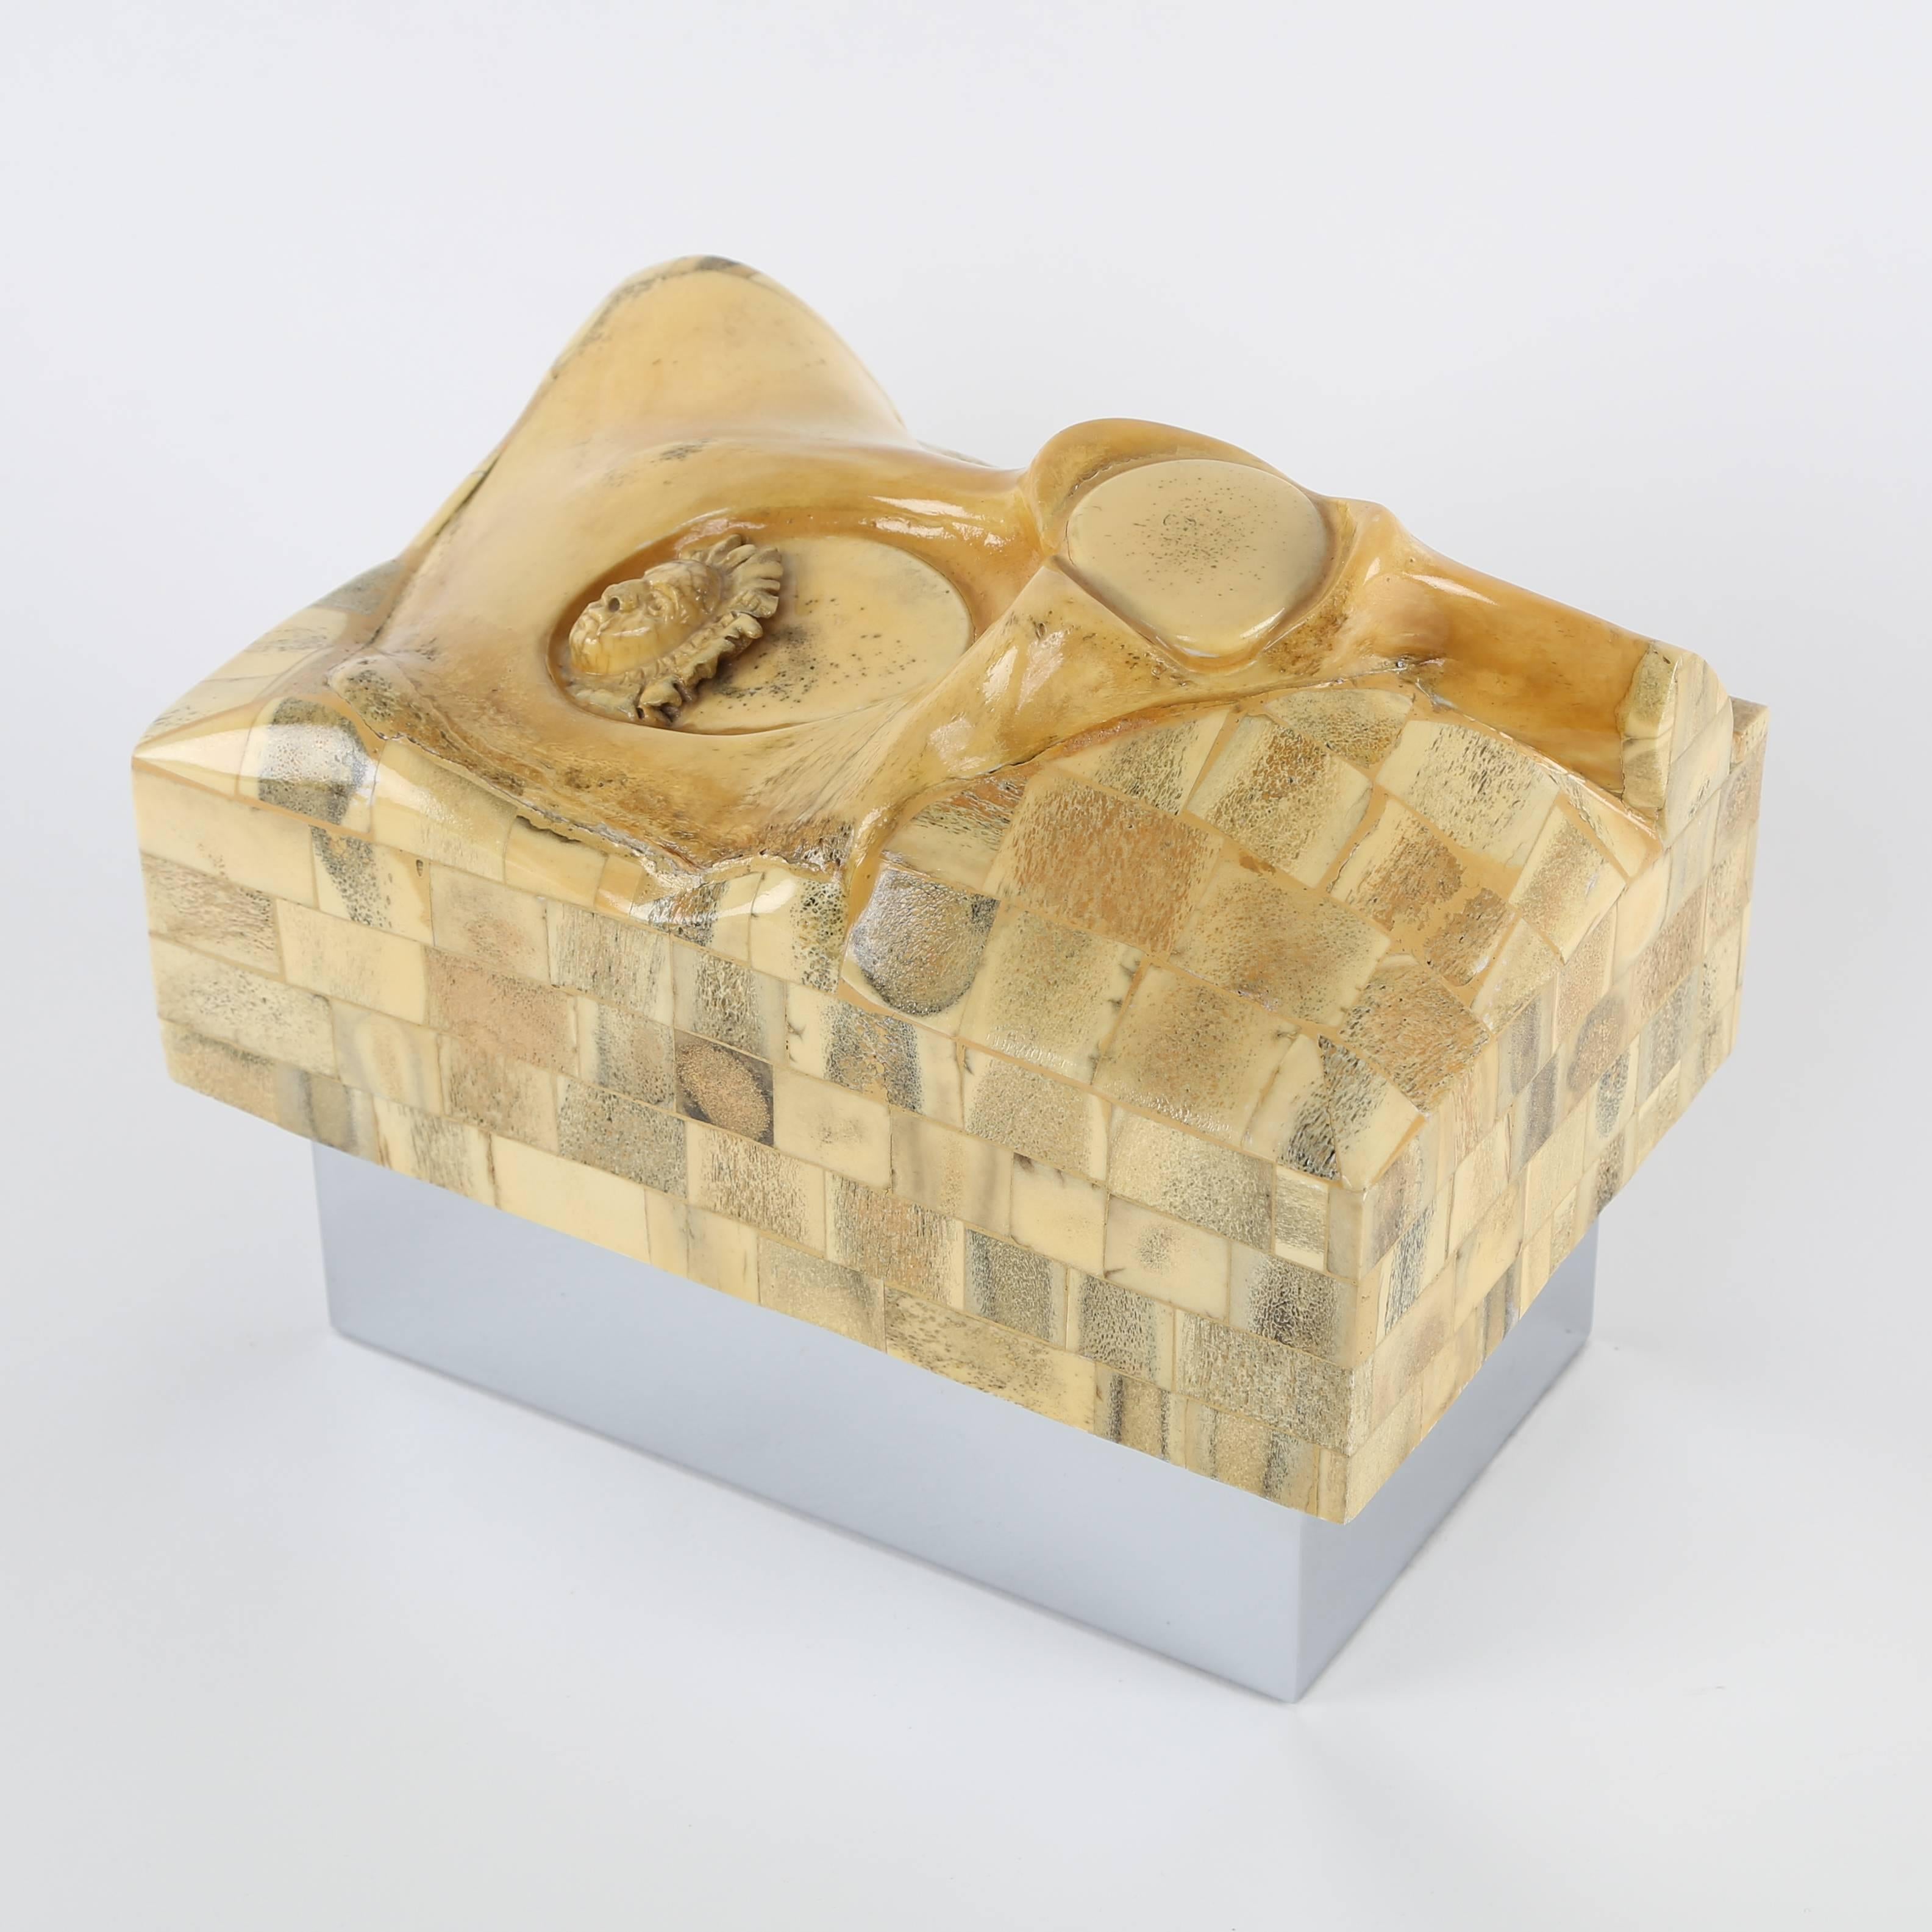 A conversation starter if ever there was one, this rare and unusual 1970s box features a large bone as well as a small face carved from bone. The sides of the top are covered in tessellated bone tiles. The base is nickel-plated steel, and both the